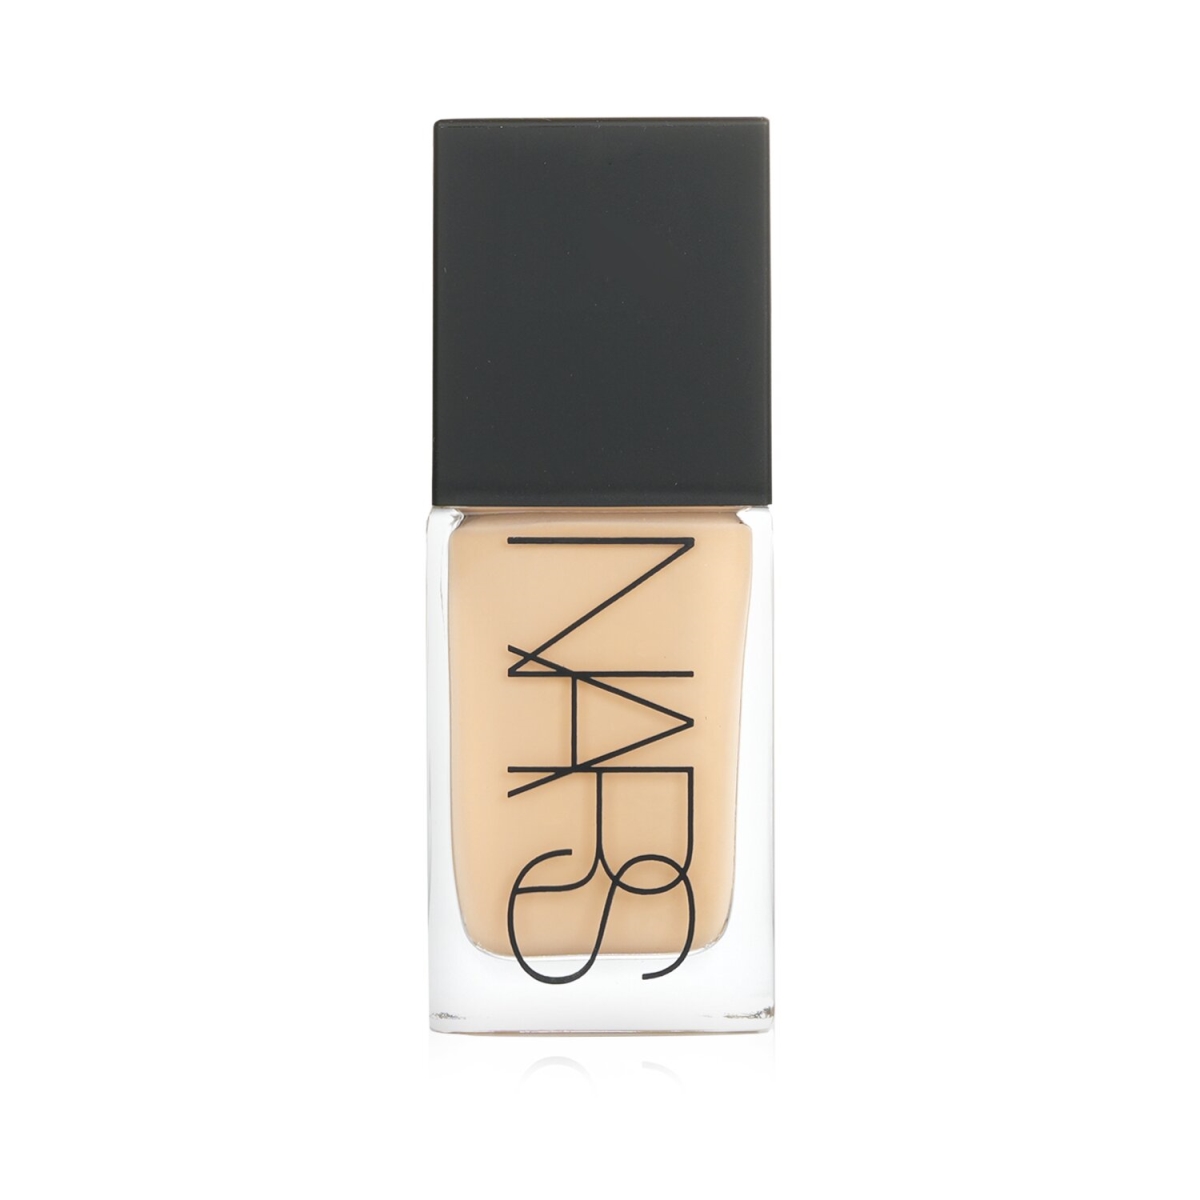 Picture of NARS 278158 30 ml Light Reflecting Foundation - Deauville No.4 Light